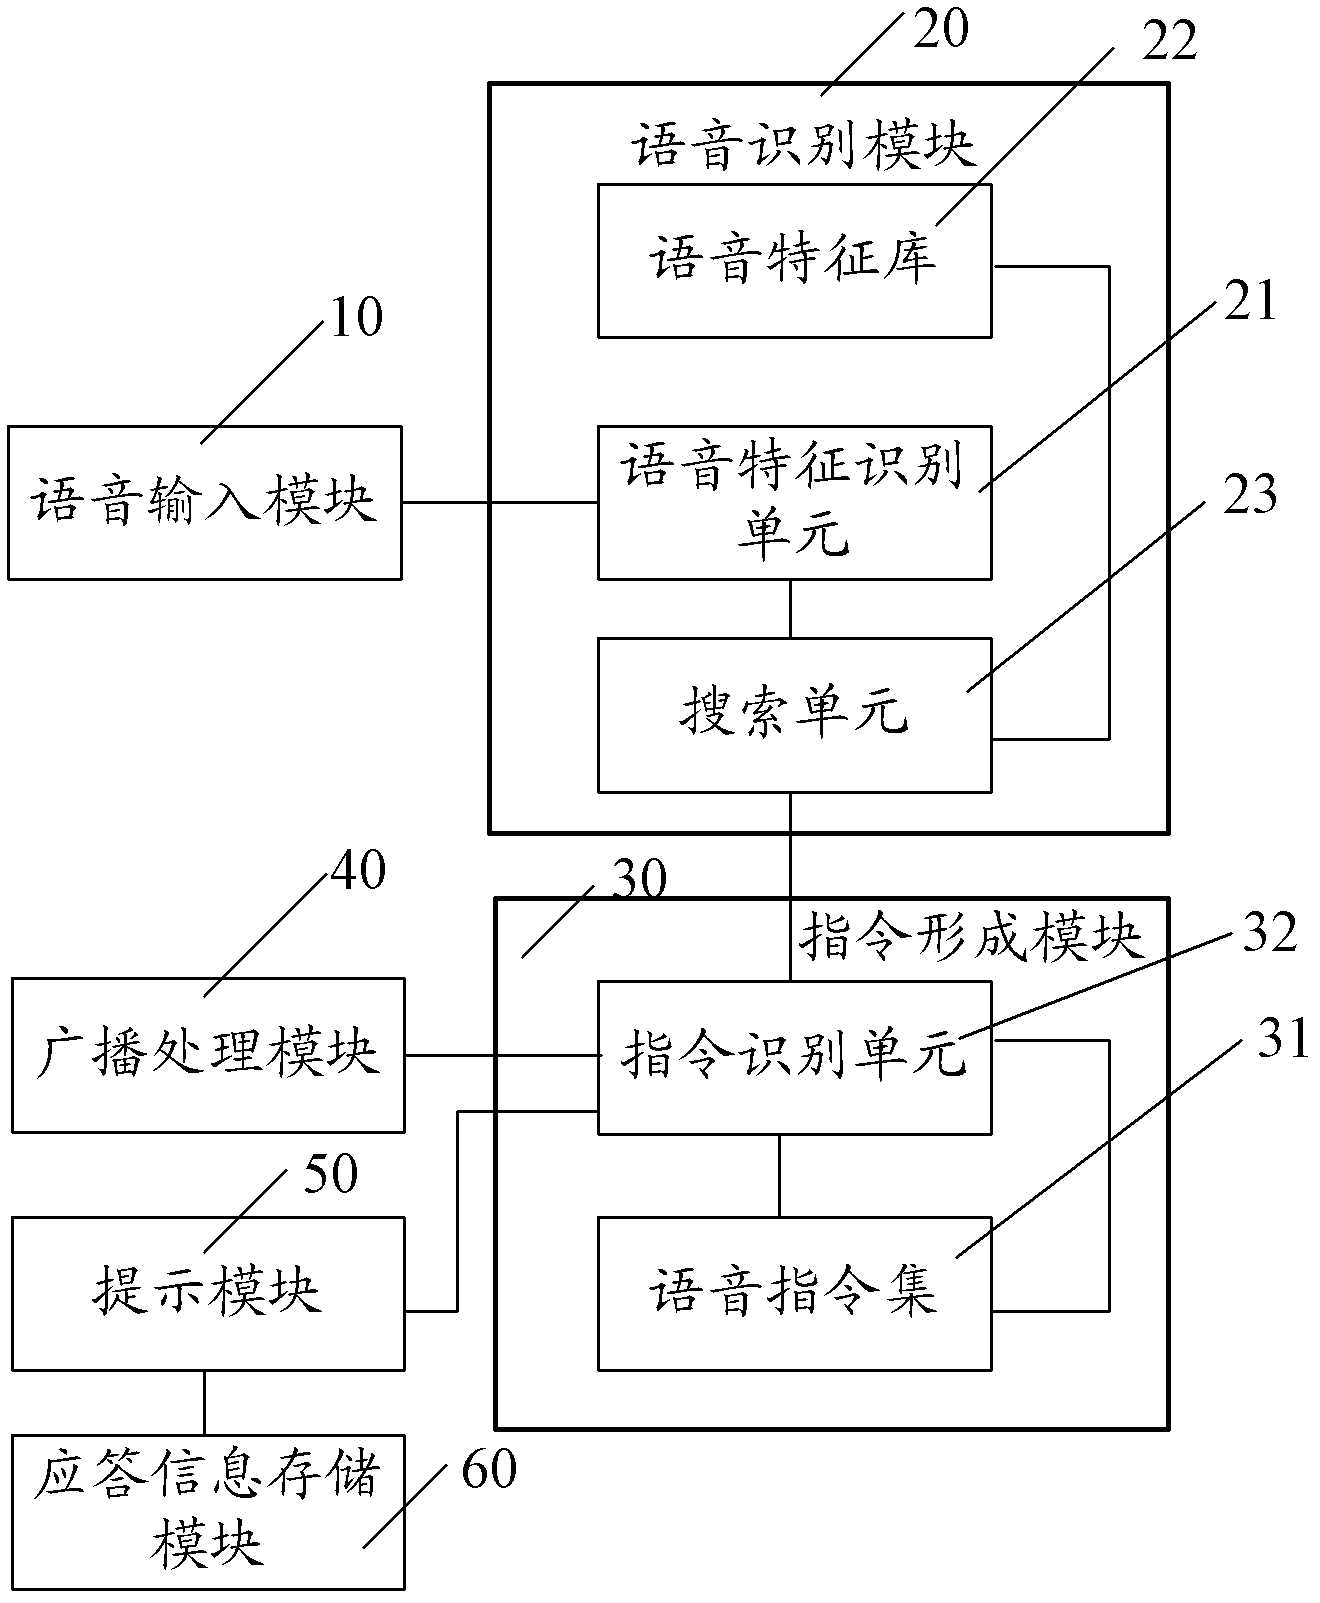 Voice broadcasting control device